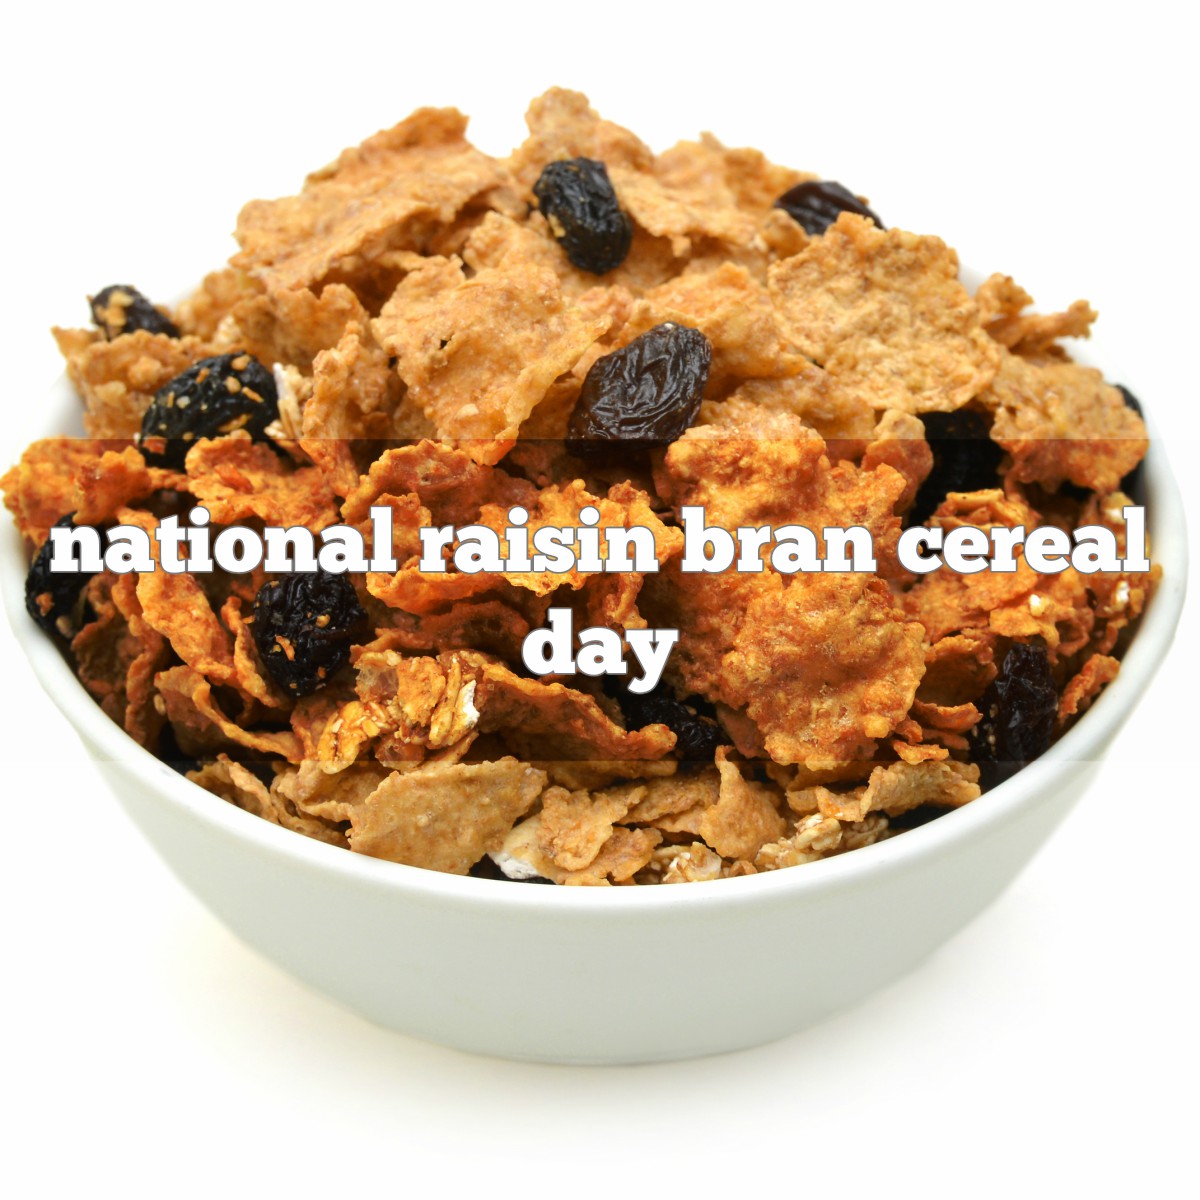 November 15th Is National Raisin Bran Cereal Day